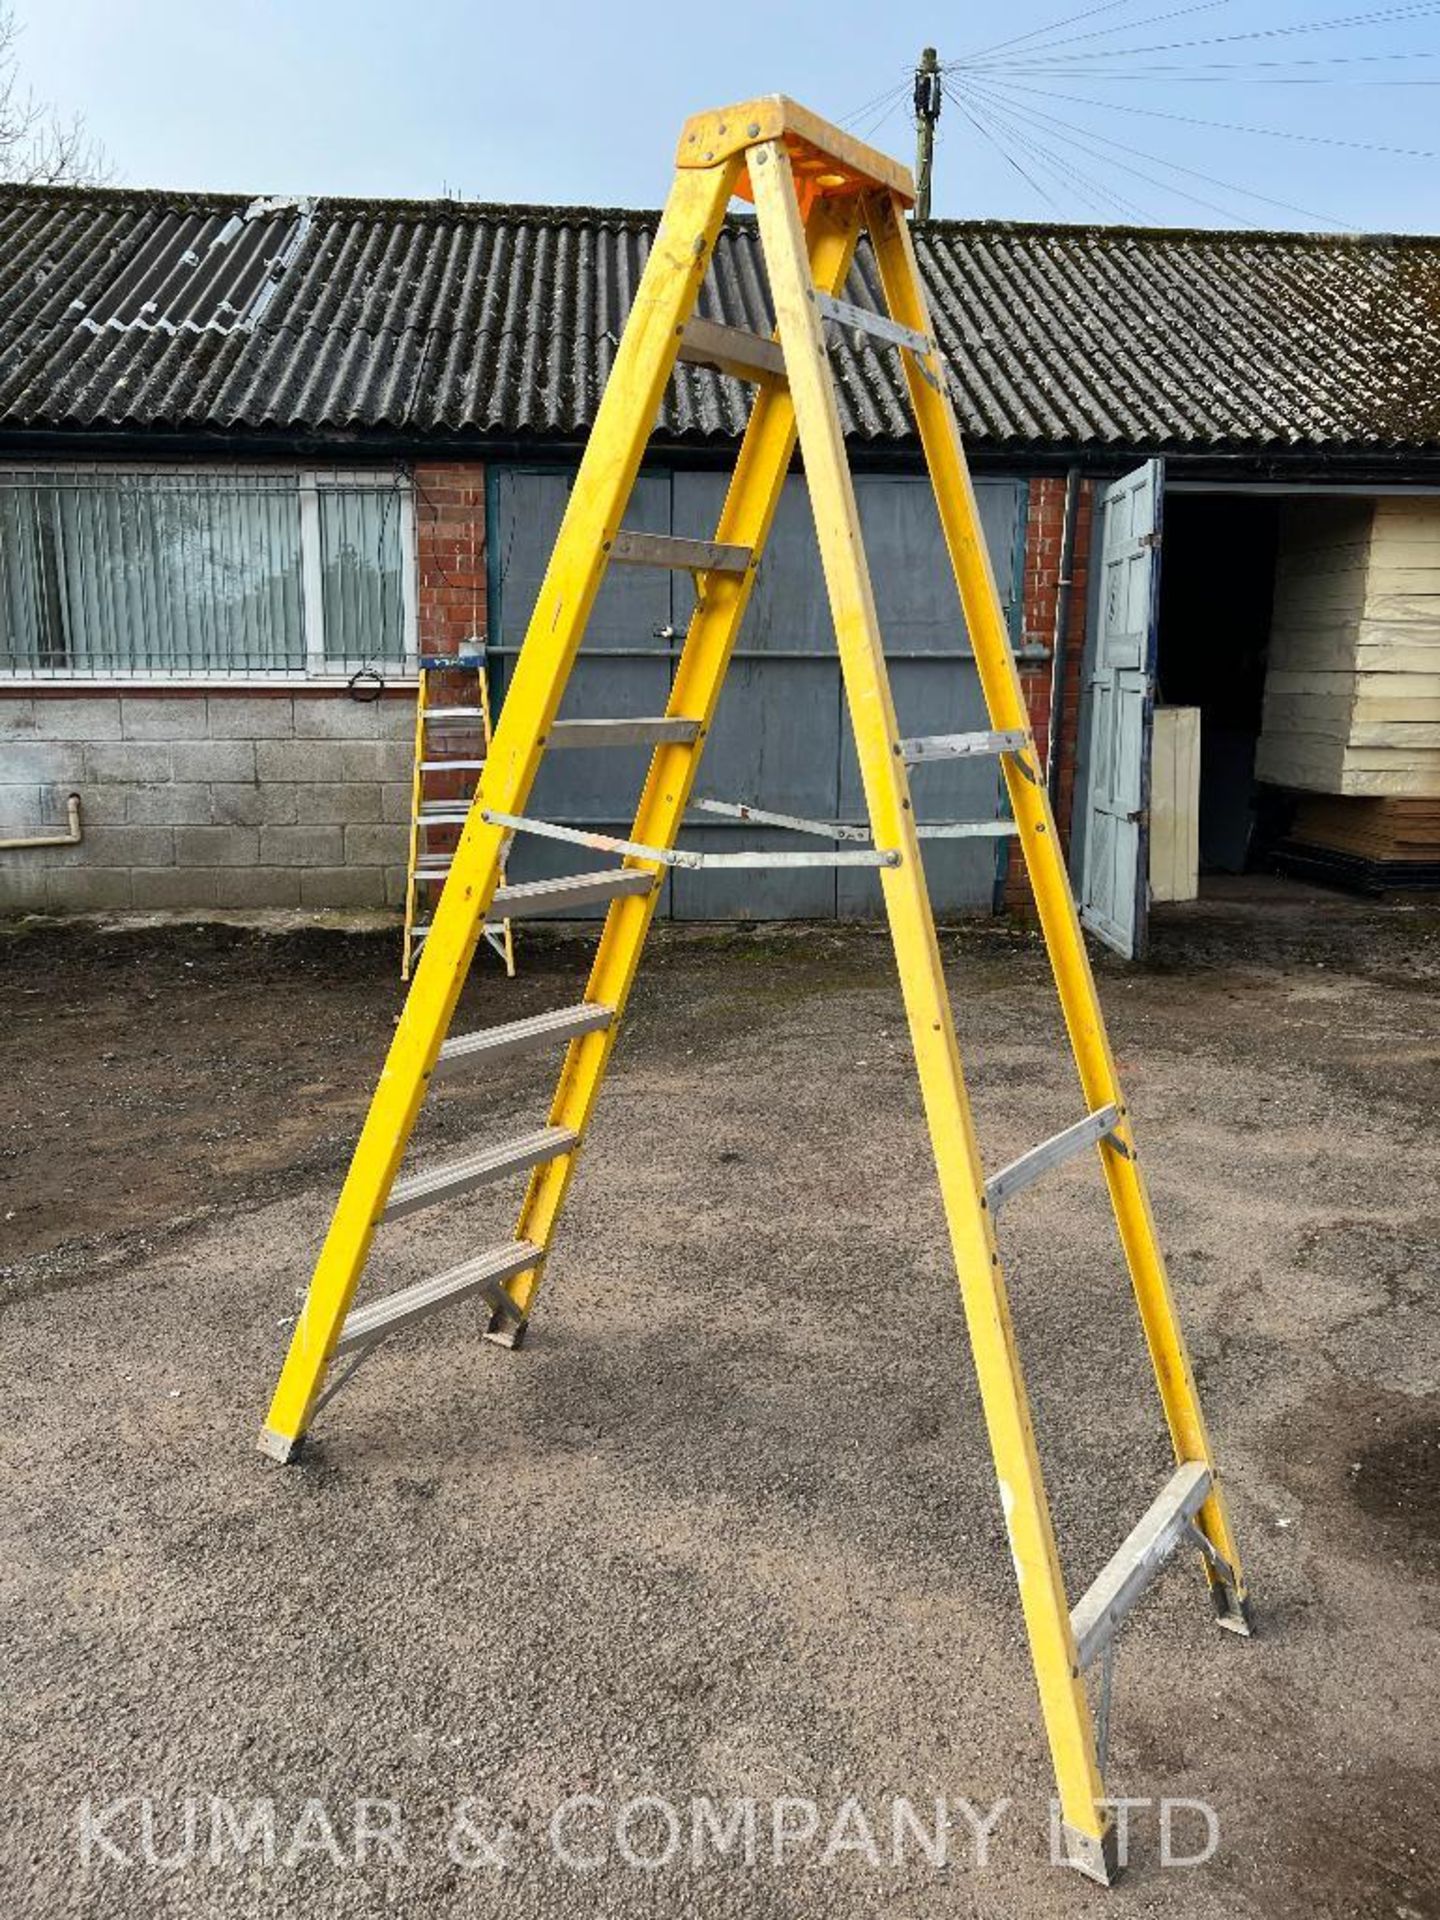 FO21-107 7 Step Fibreglass Single Ladder, EN131 Pro Certified PLEASE NOTE: THIS LOT IS LOCATED IN CA - Image 3 of 5